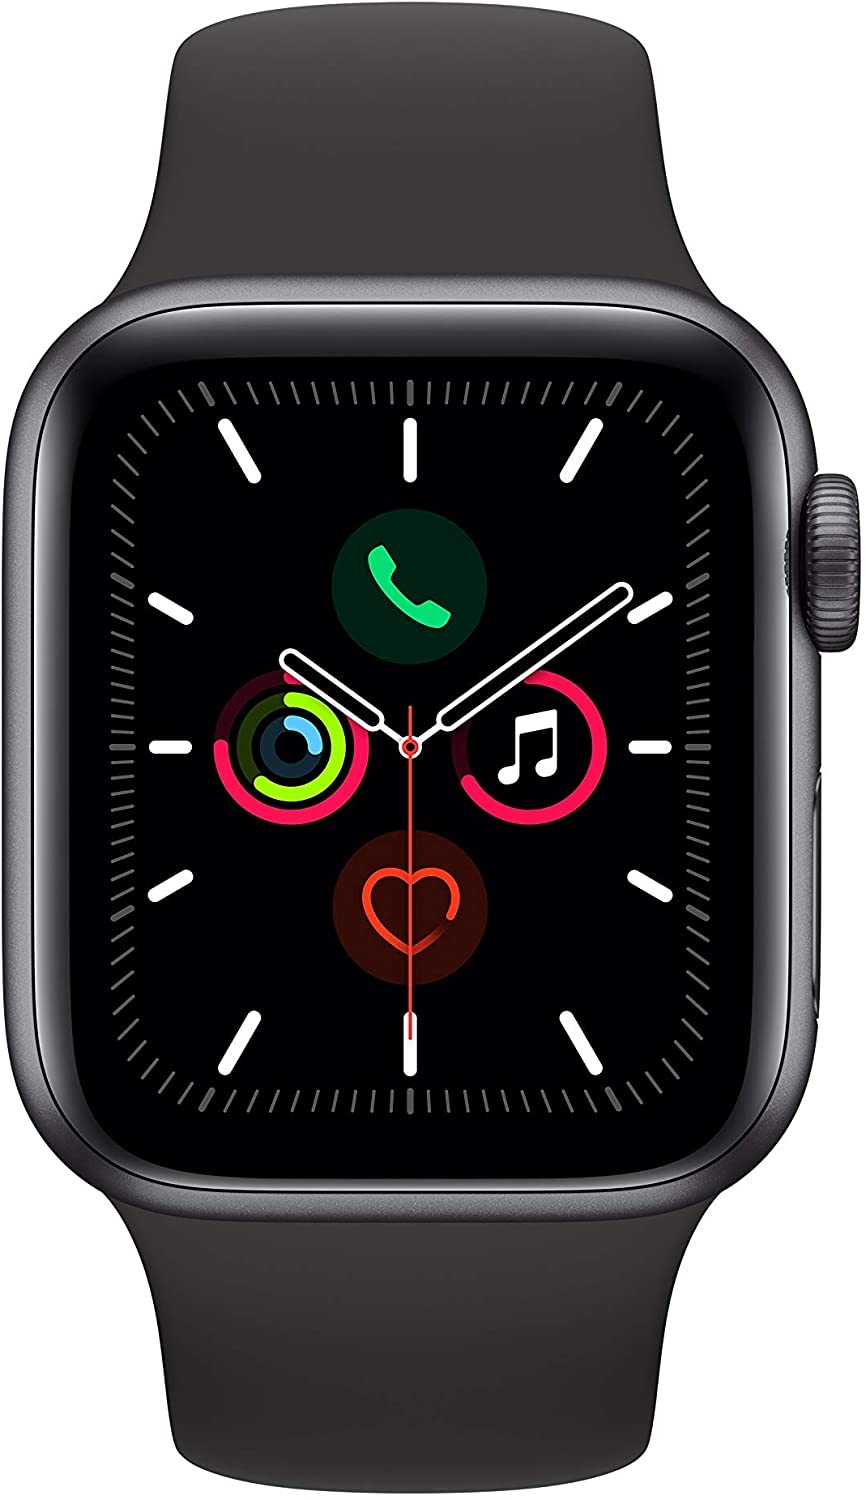 thumbnail 48 - Apple Watch Series 5 40mm 44mm - GPS Only or GPS + Cellular - Various colors